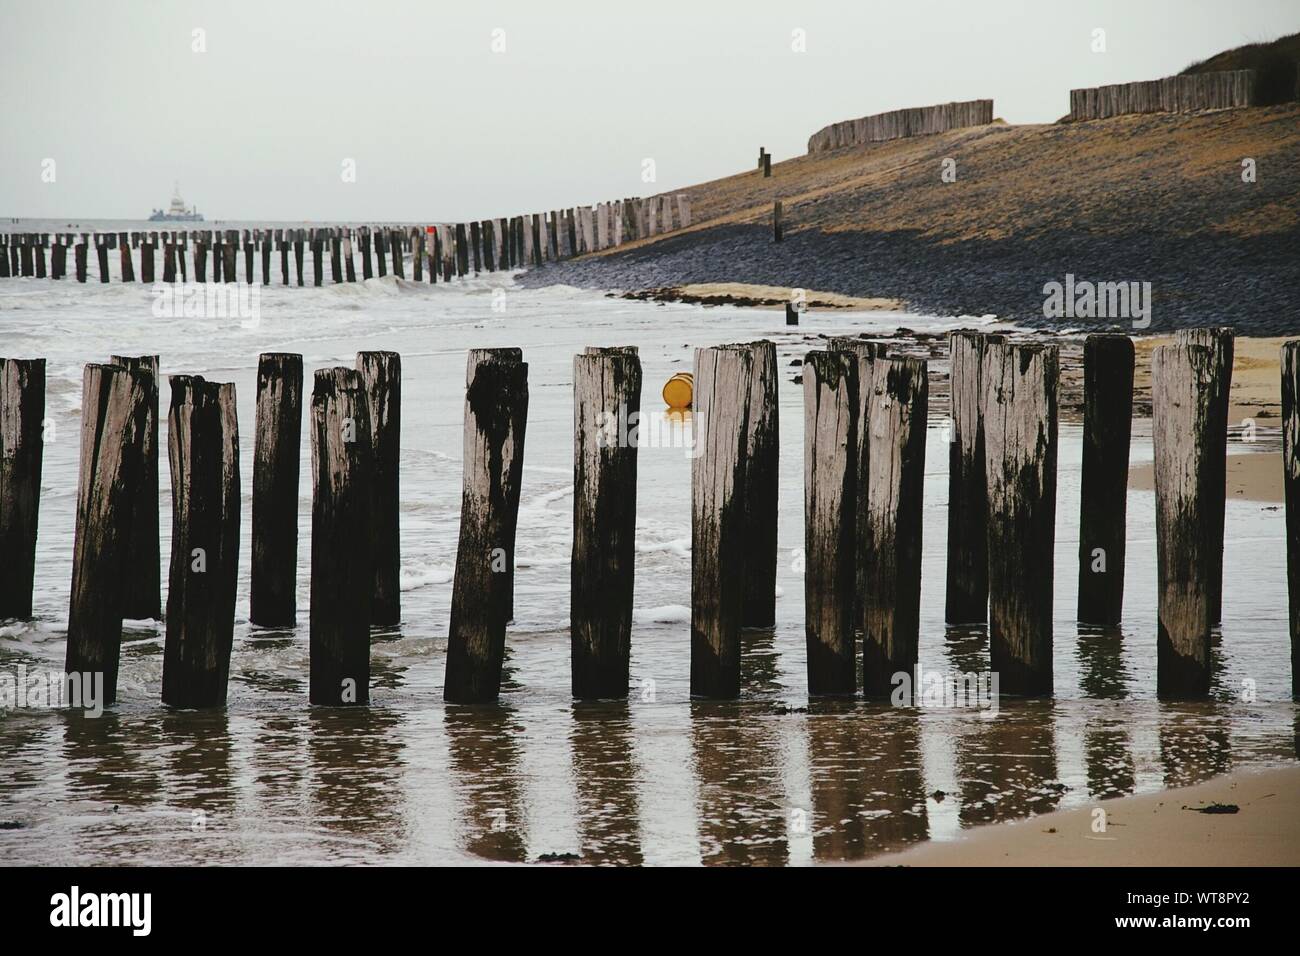 Wooden Groynes On Shore At Sea Against Sky Stock Photo